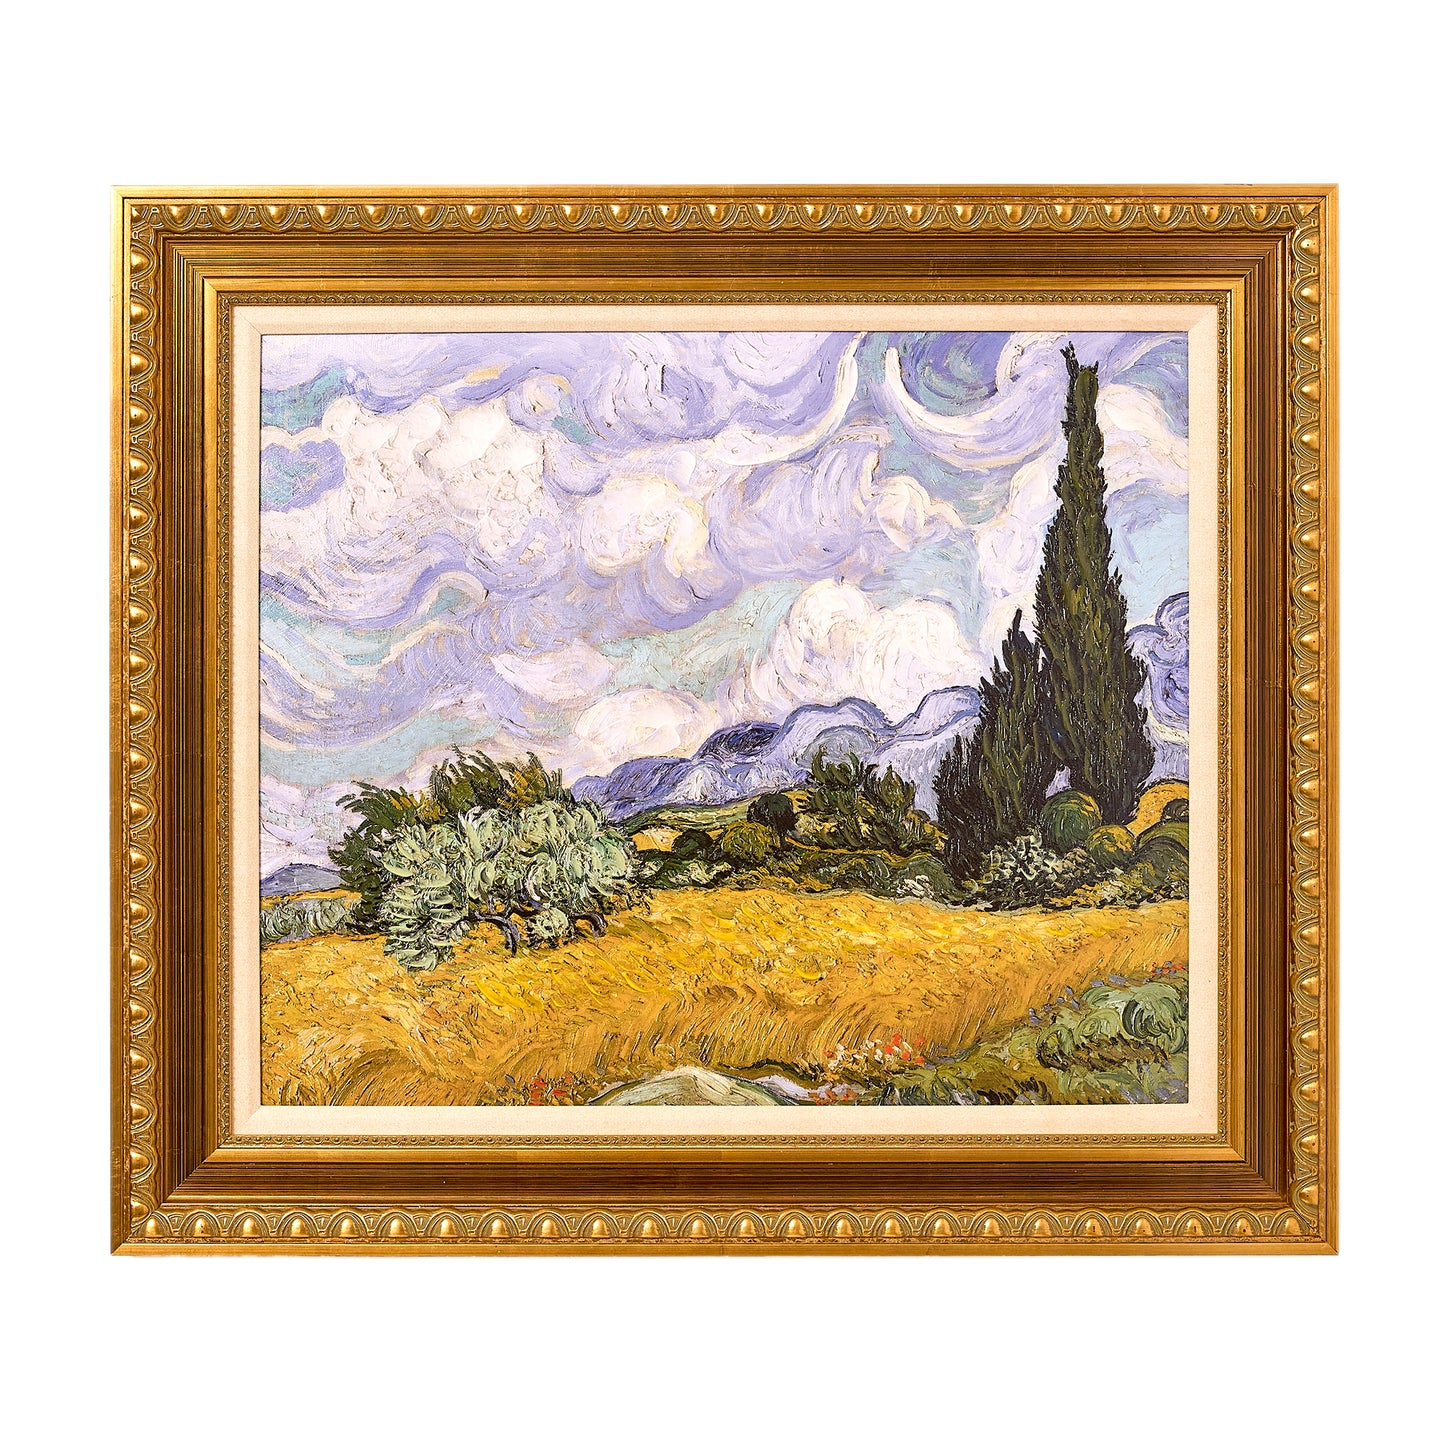 Ornate Framed Wheat Field with Cypresses Canvas Print by Vincent van Gogh 30.75" x 26.75"